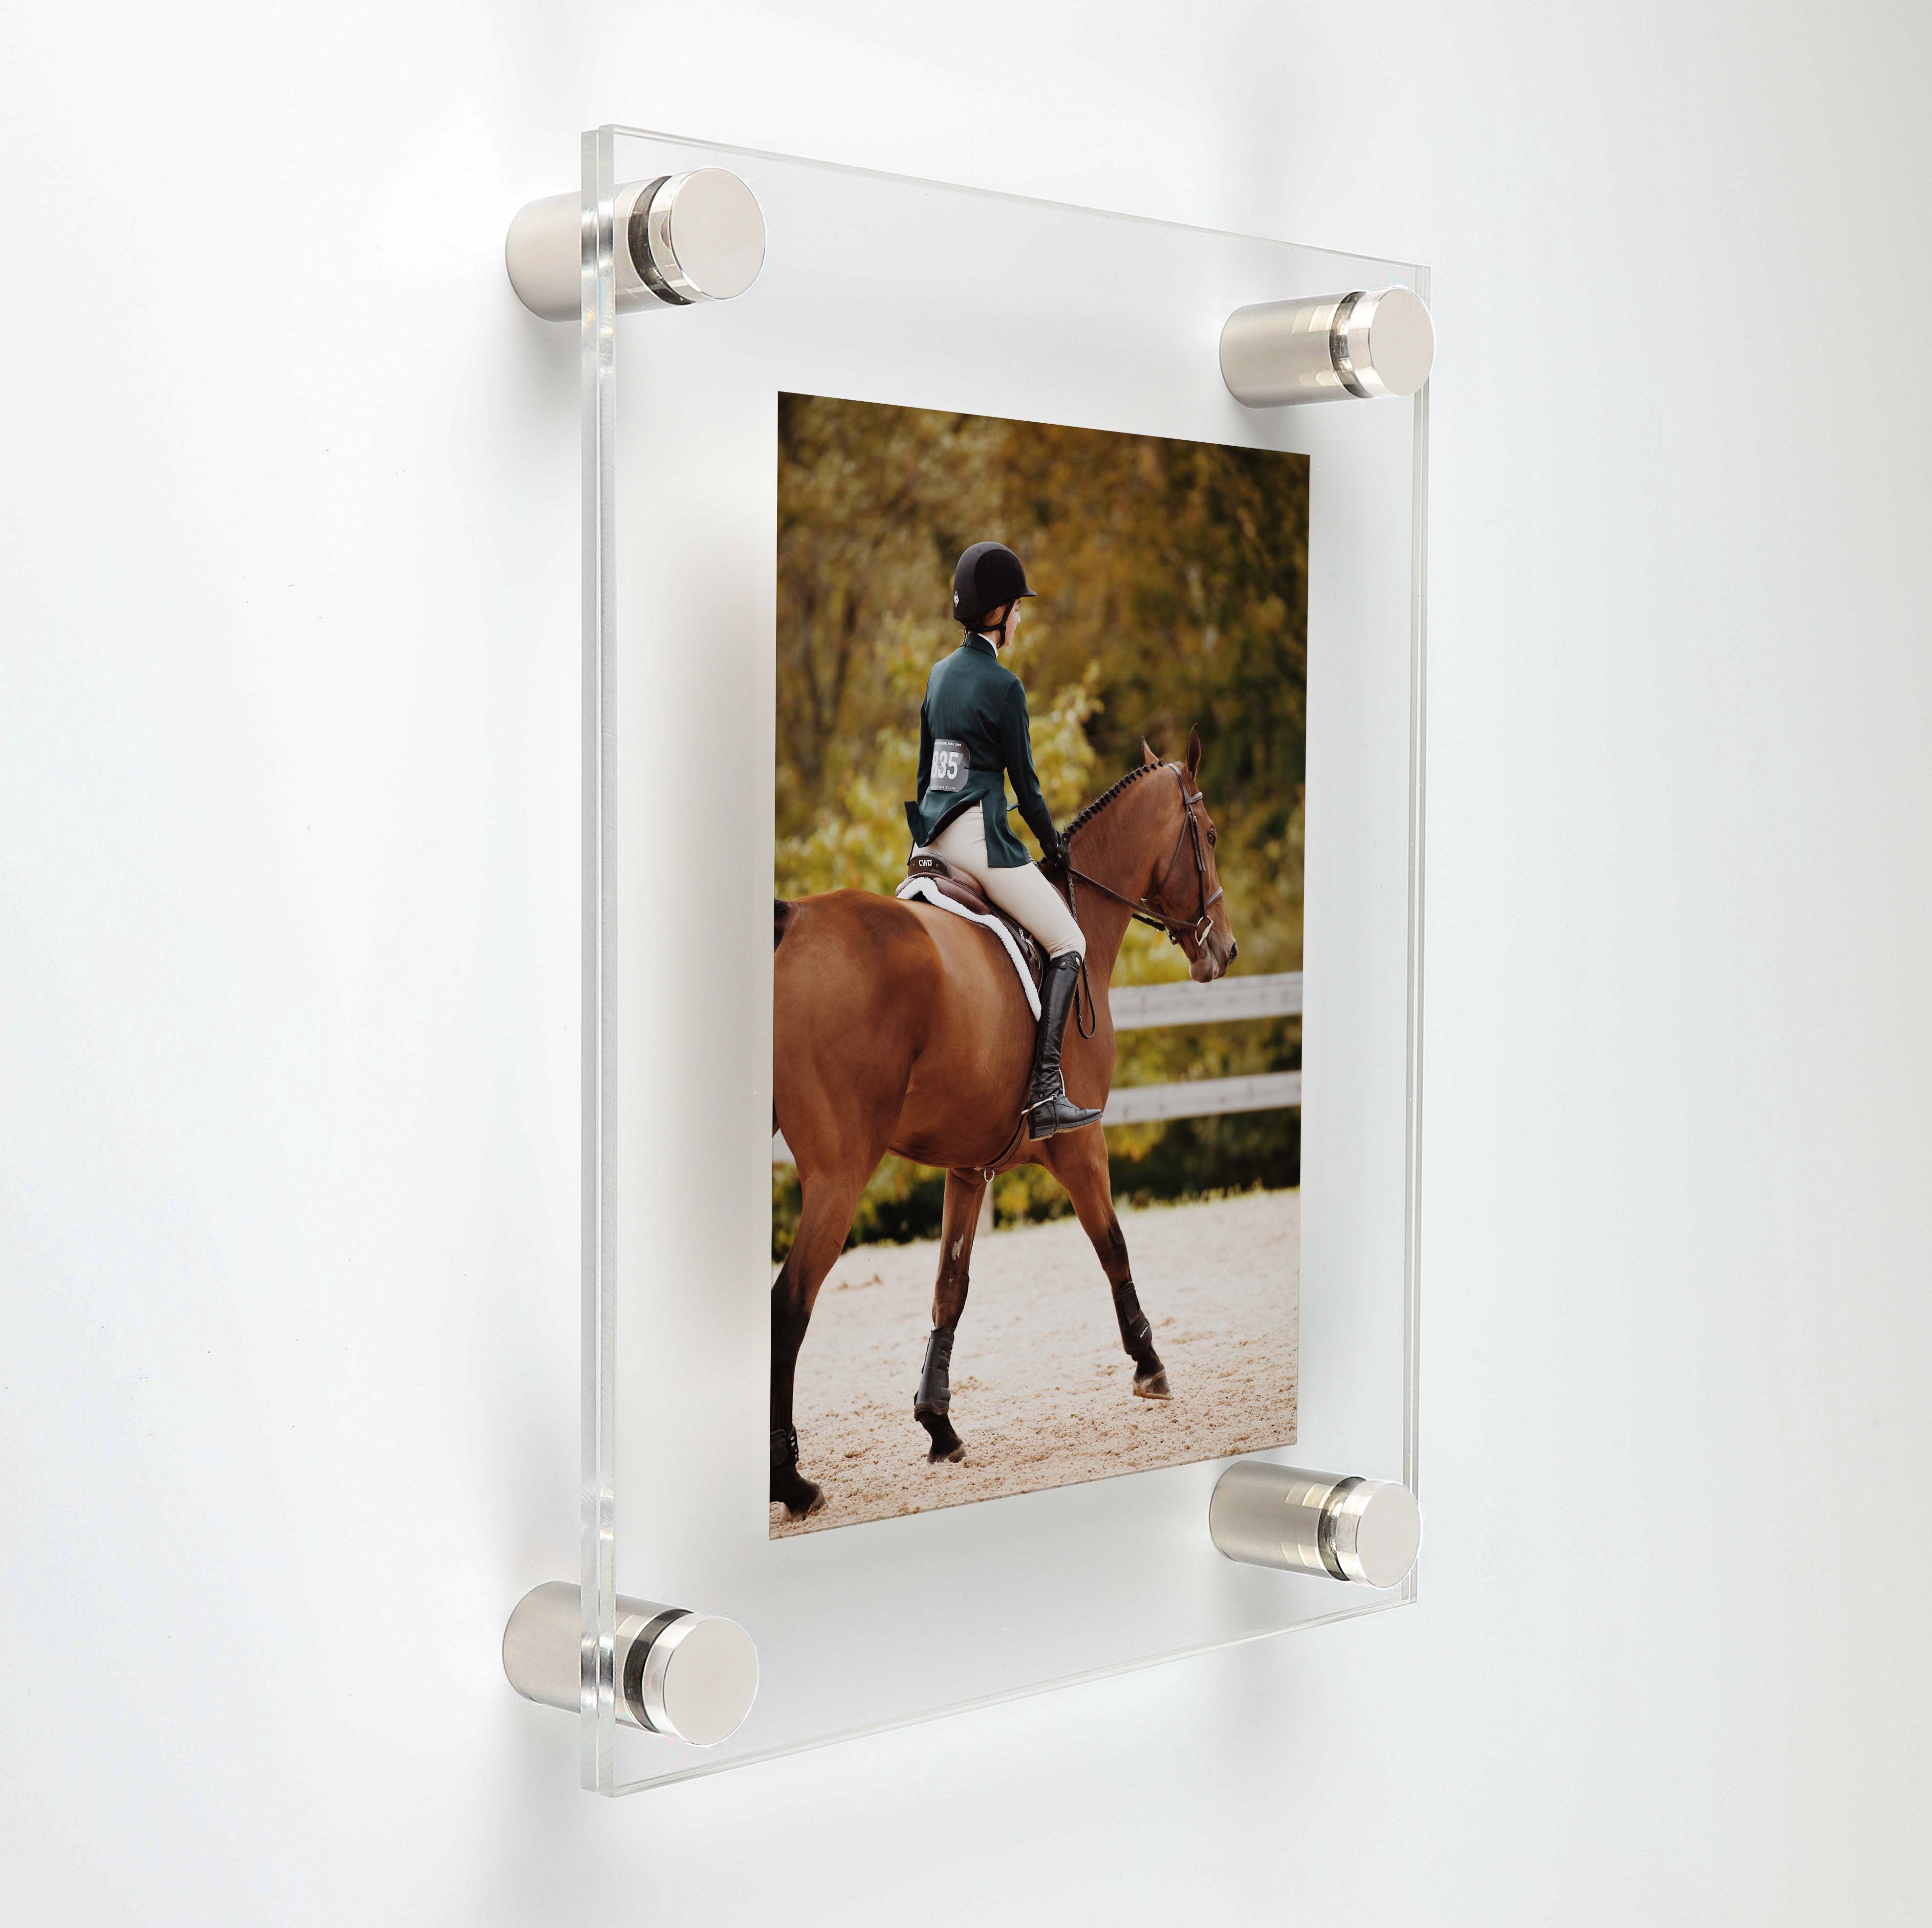 (2) 27'' x 39'' Clear Acrylics , Pre-Drilled With Polished Edges (Thick 3/16'' each), Wall Frame with (6) 5/8'' x 3/4'' Polished Stainless Steel Standoffs includes Screws and Anchors